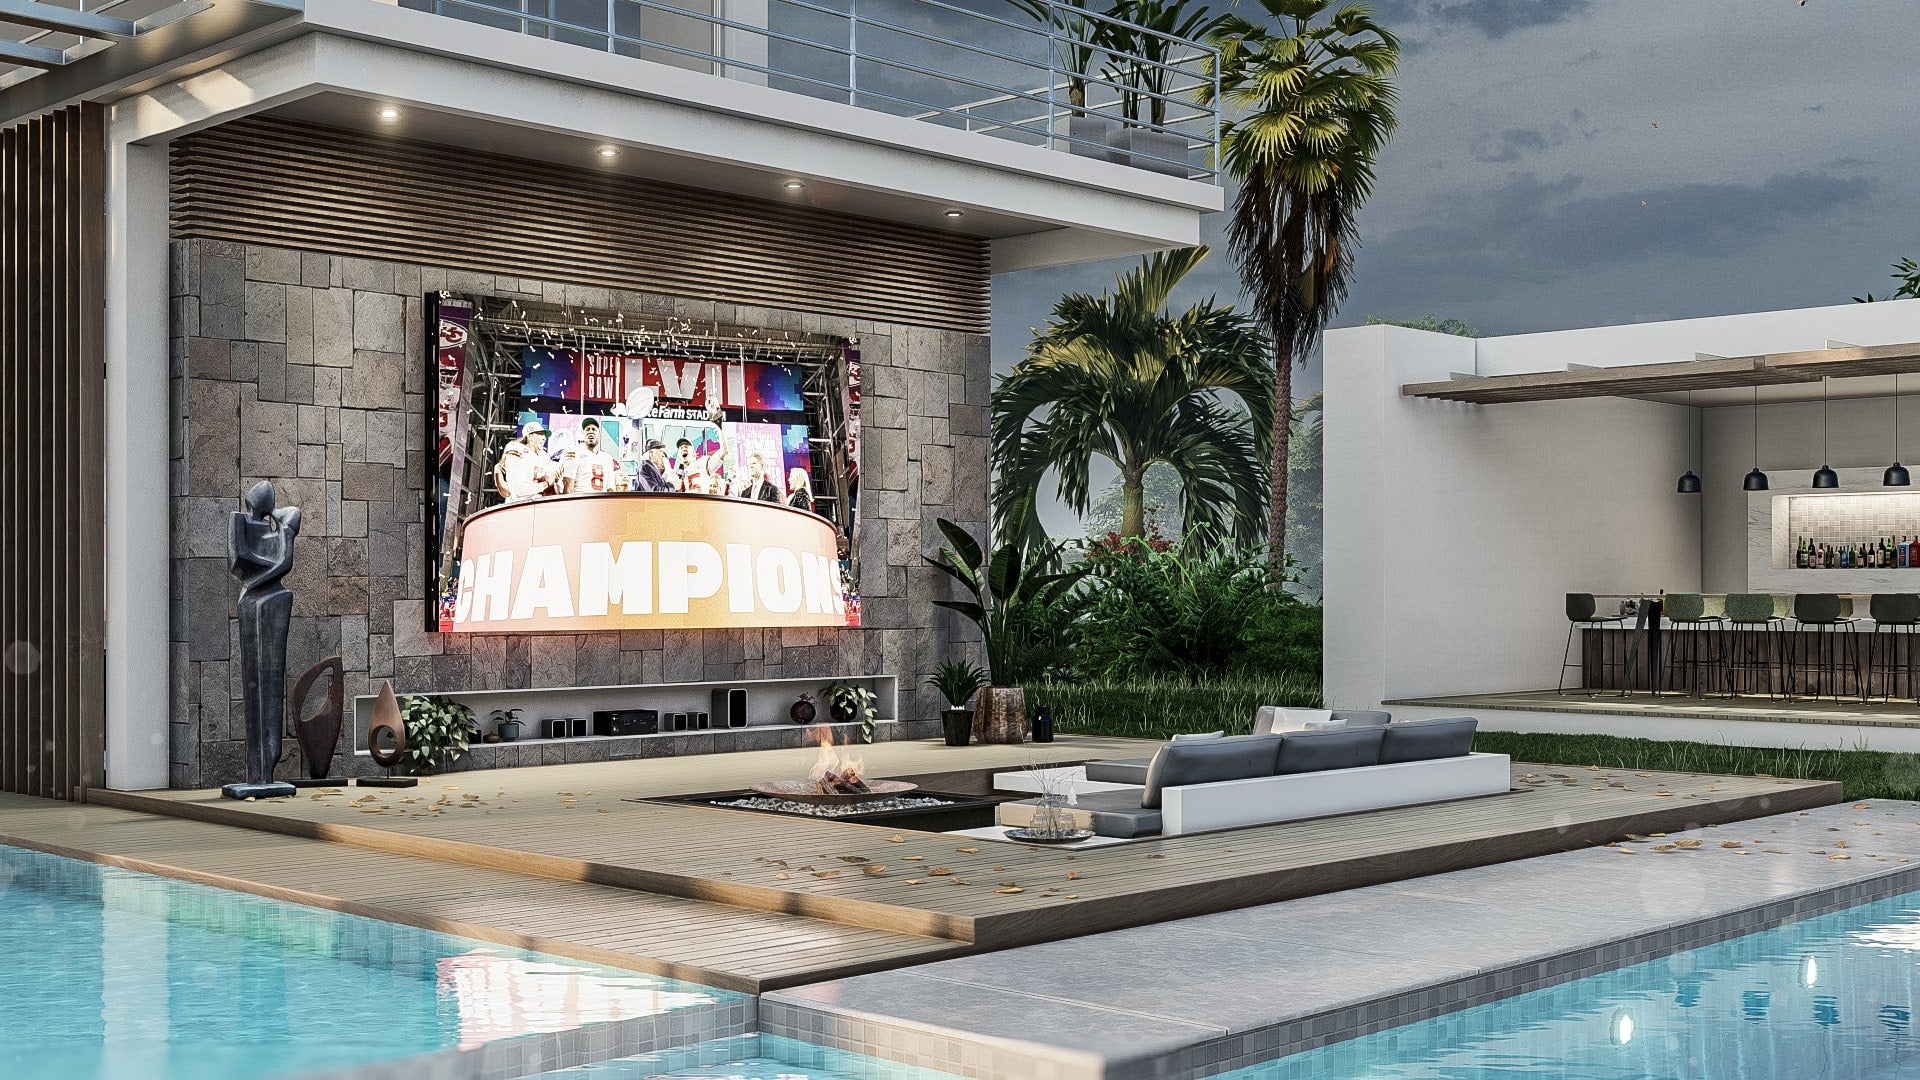 Outdoor LED Pool Displays: Why They Are Better Than Your Traditional Outdoor TV